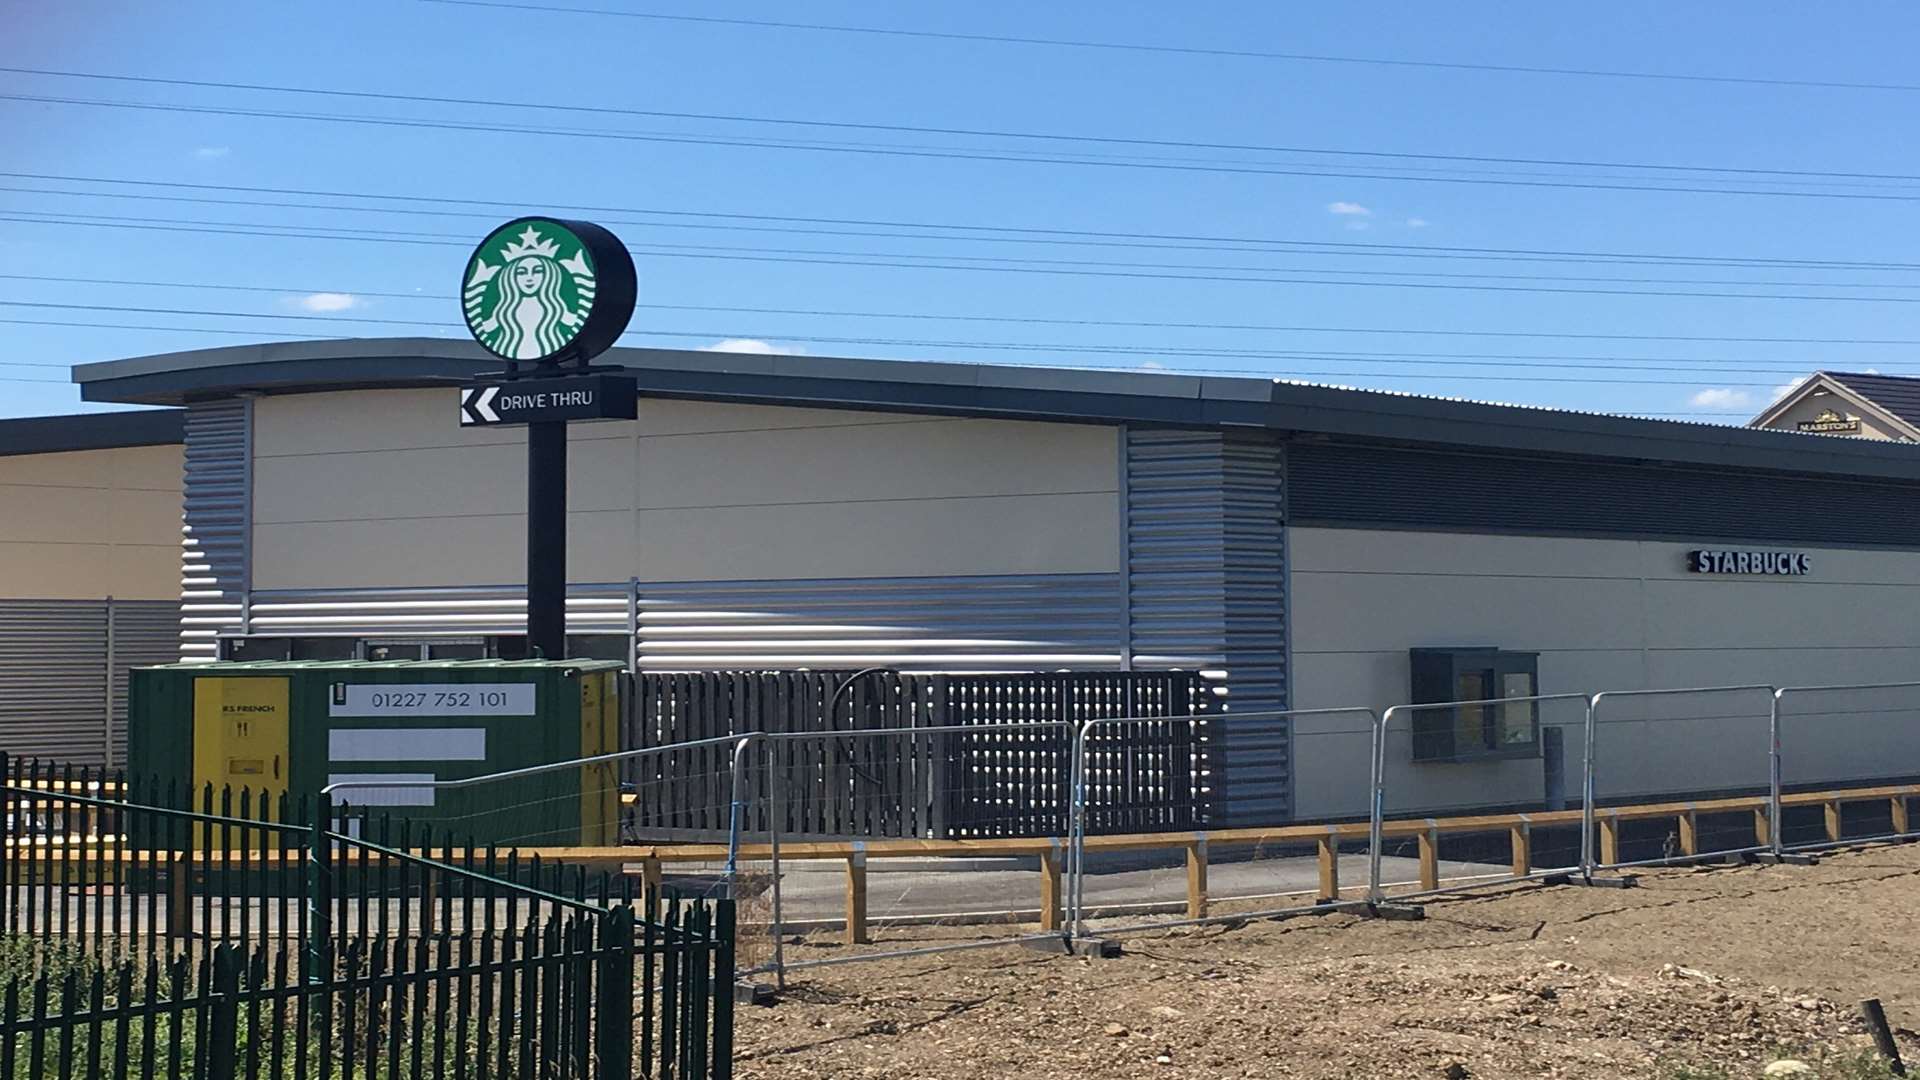 Starbucks is among the new businesses about to open at Neats Court Retail Park in Queenborough.